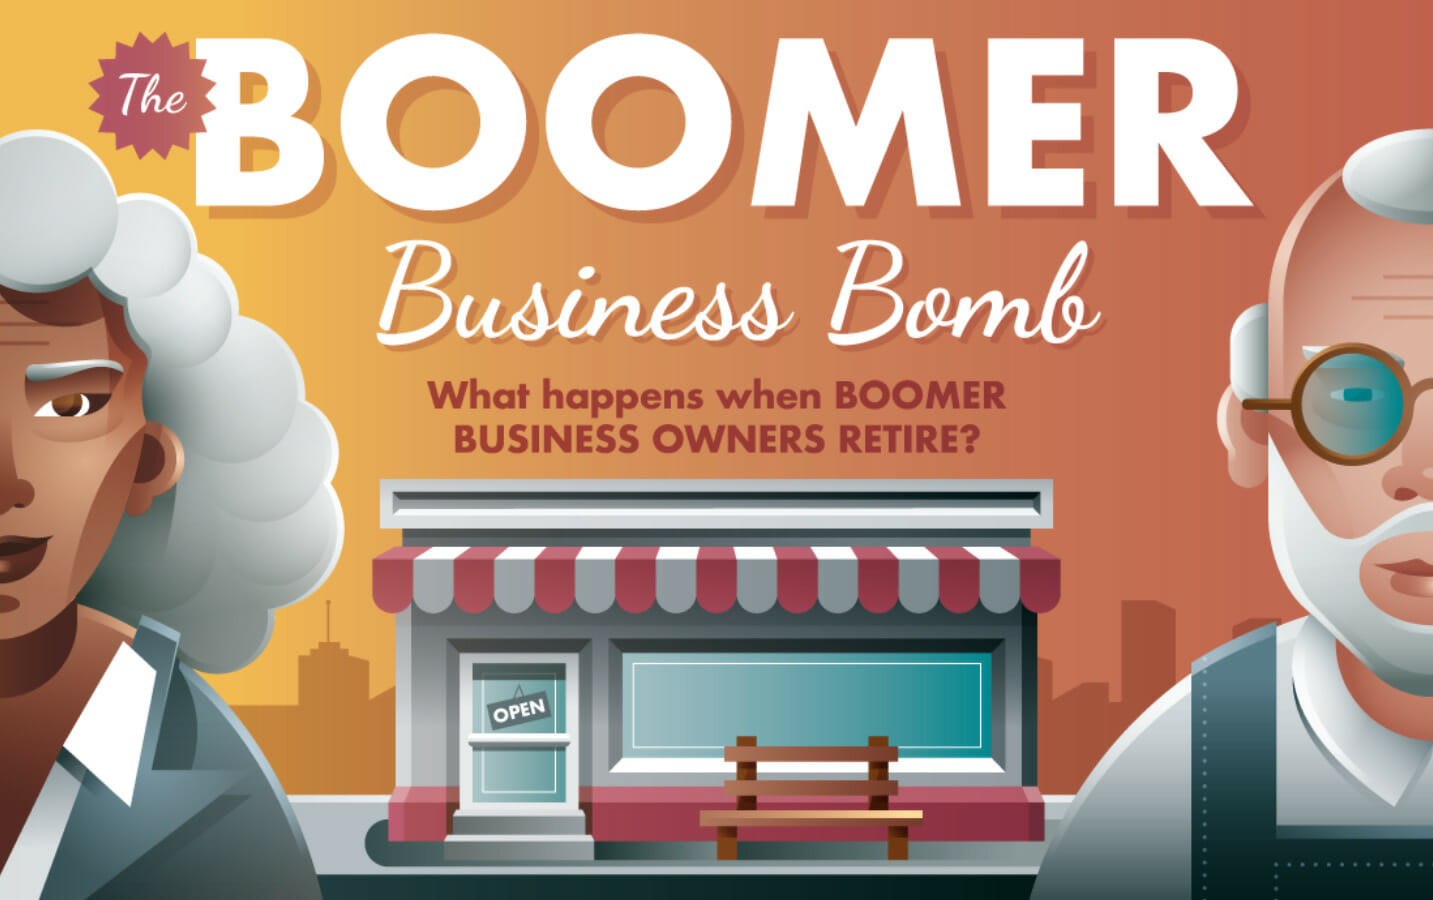 Boomer Businesses Are A Great Investment For Millennials